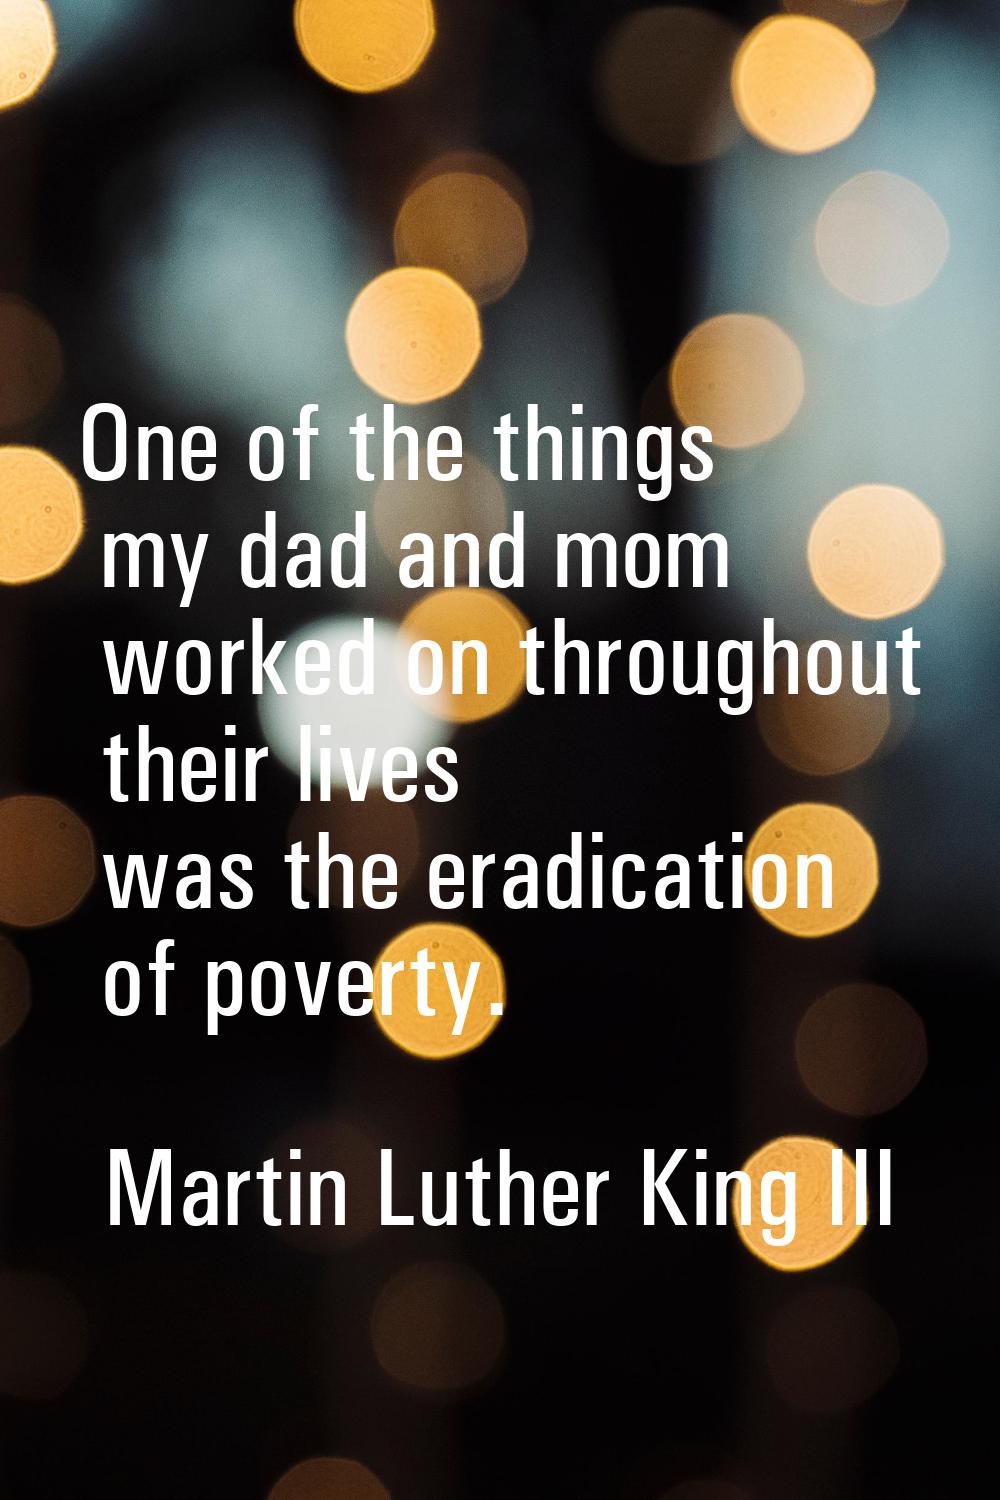 One of the things my dad and mom worked on throughout their lives was the eradication of poverty.